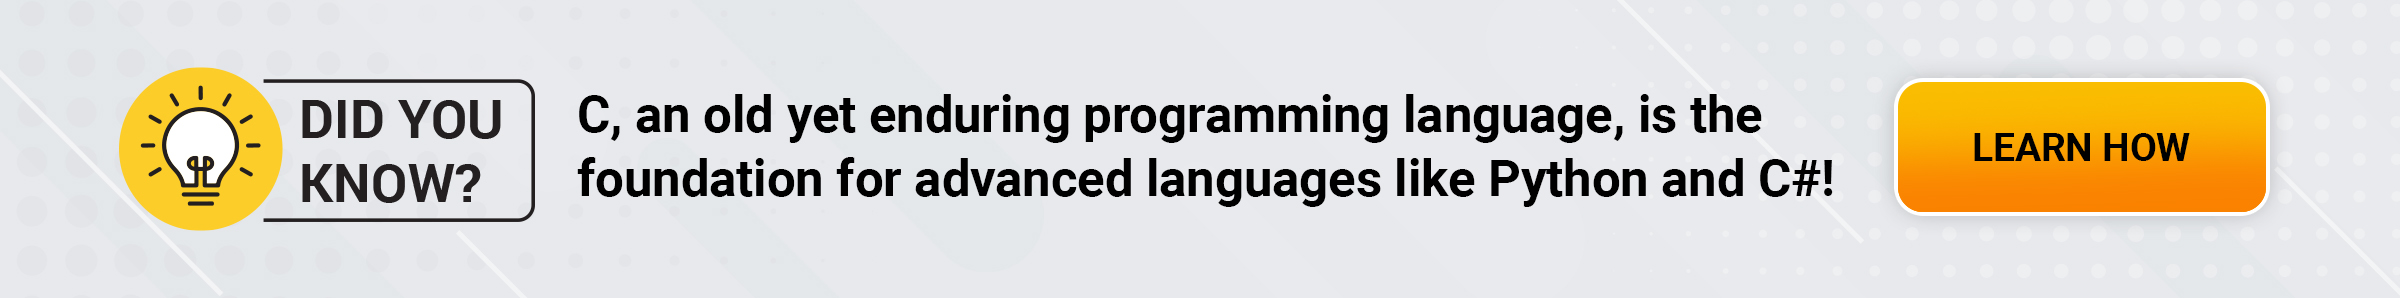 C, an old yet enduring programming language, is the foundation for advanced languages like Python and C#!